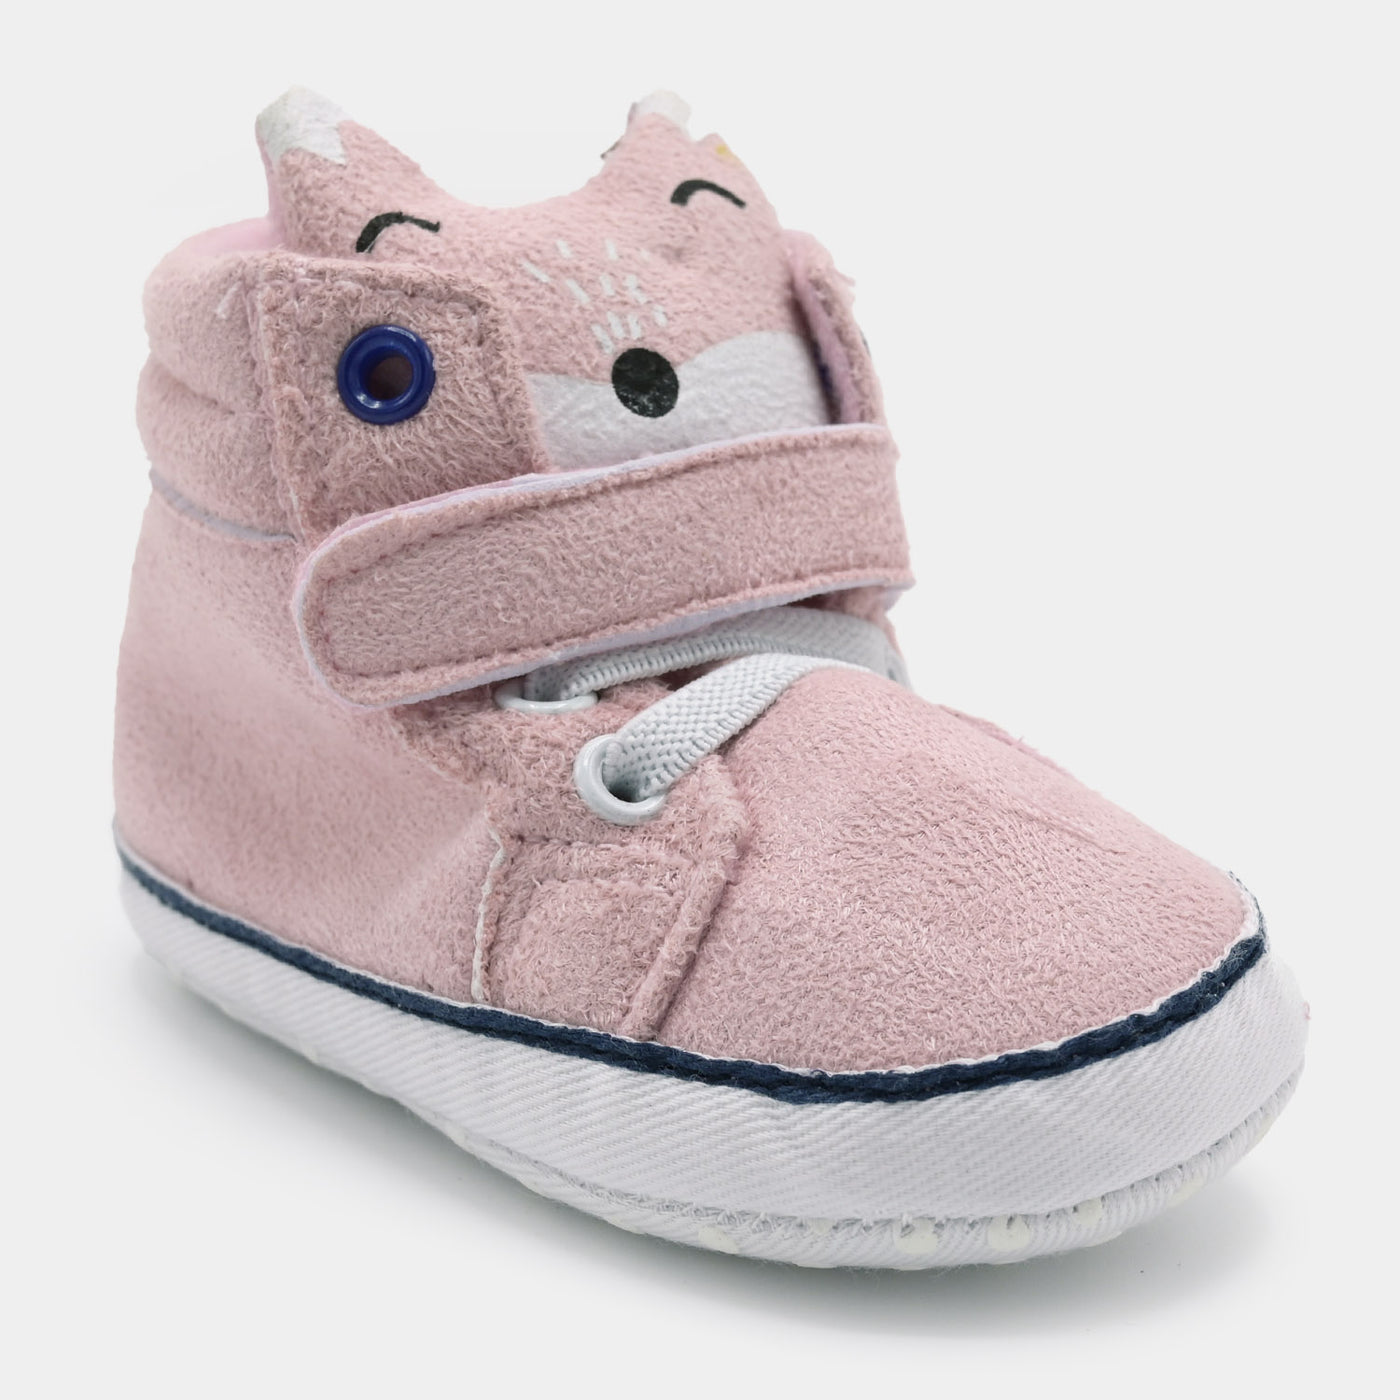 Baby Girls Shoes C-774-Pink